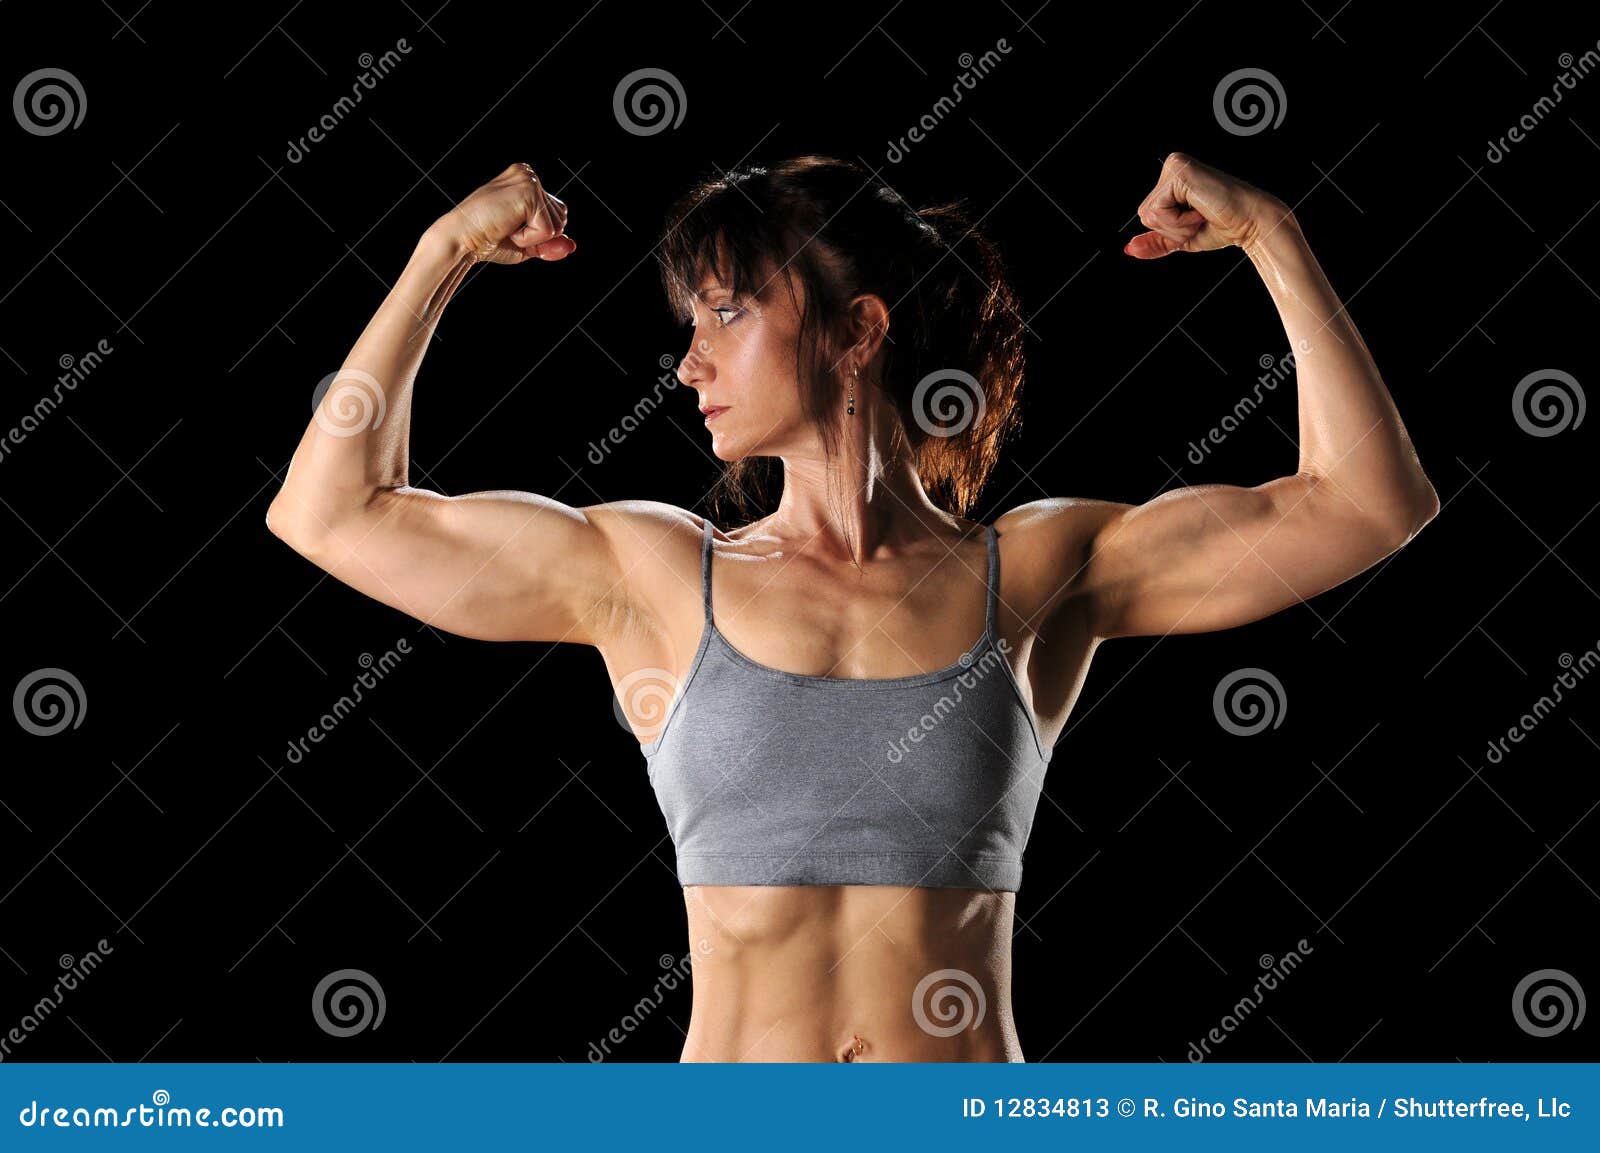 carol canfield recommends muscle girl flexing biceps pic